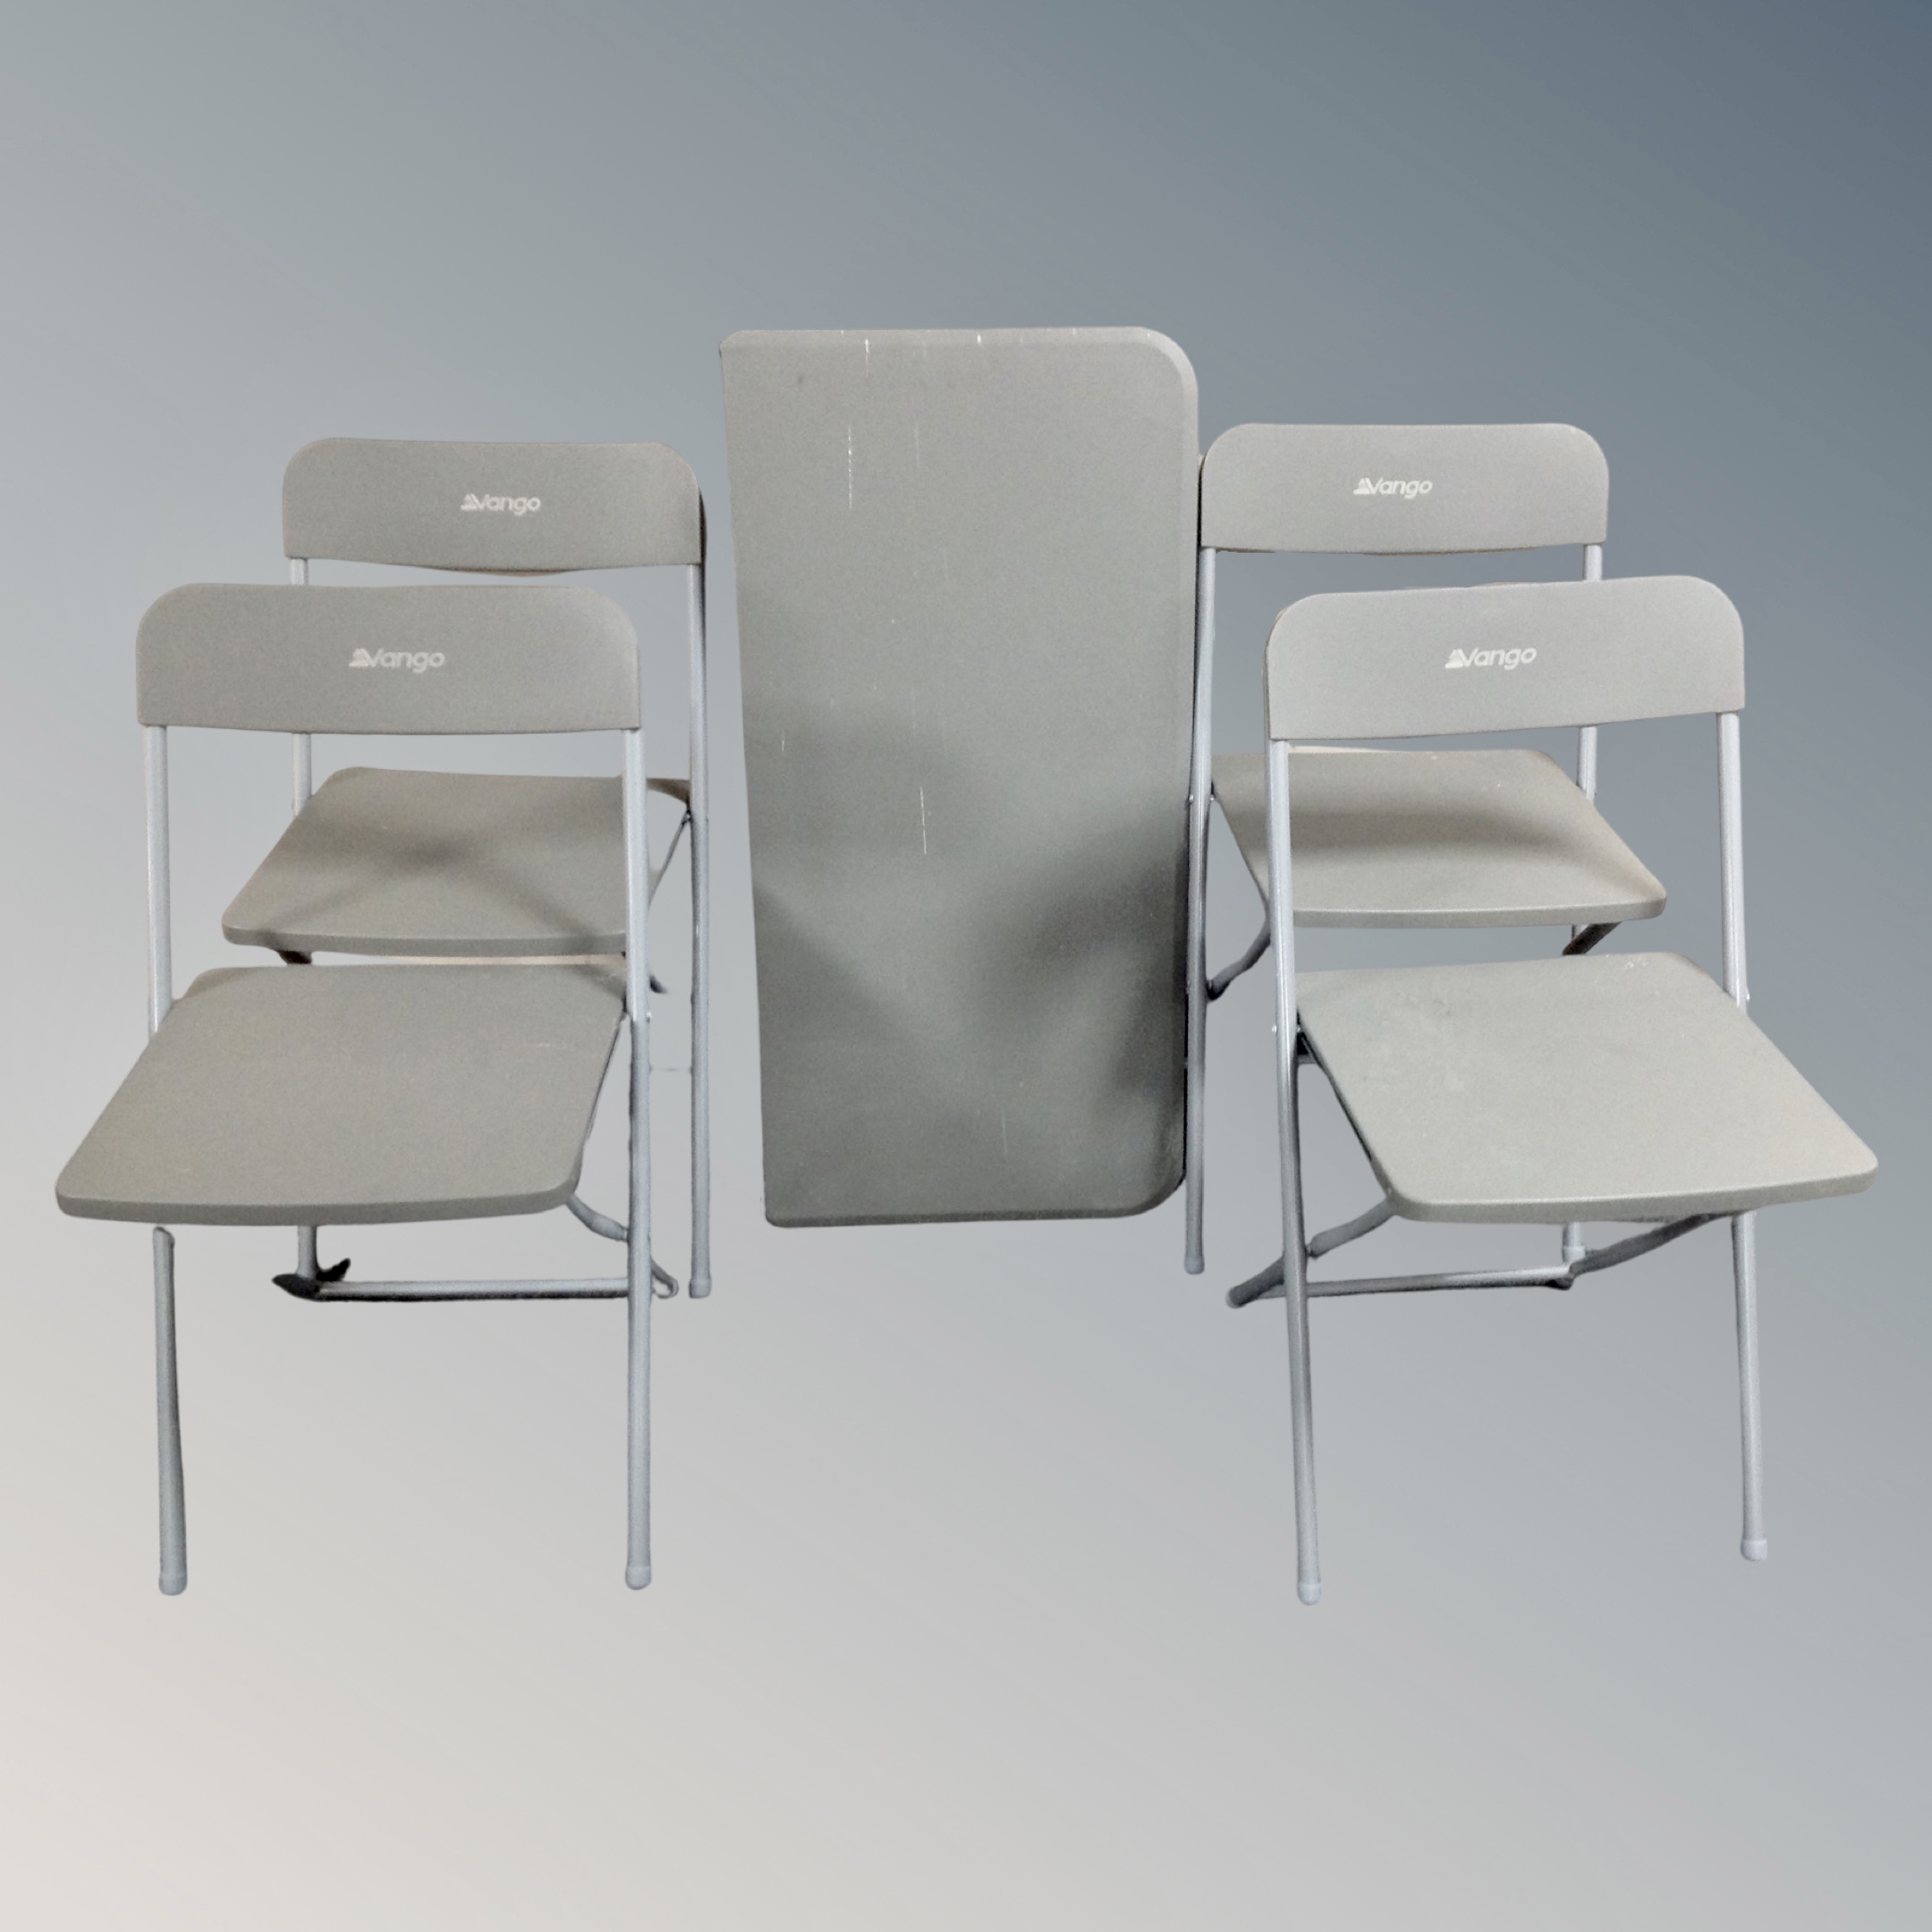 A Vango folding table together with four chairs